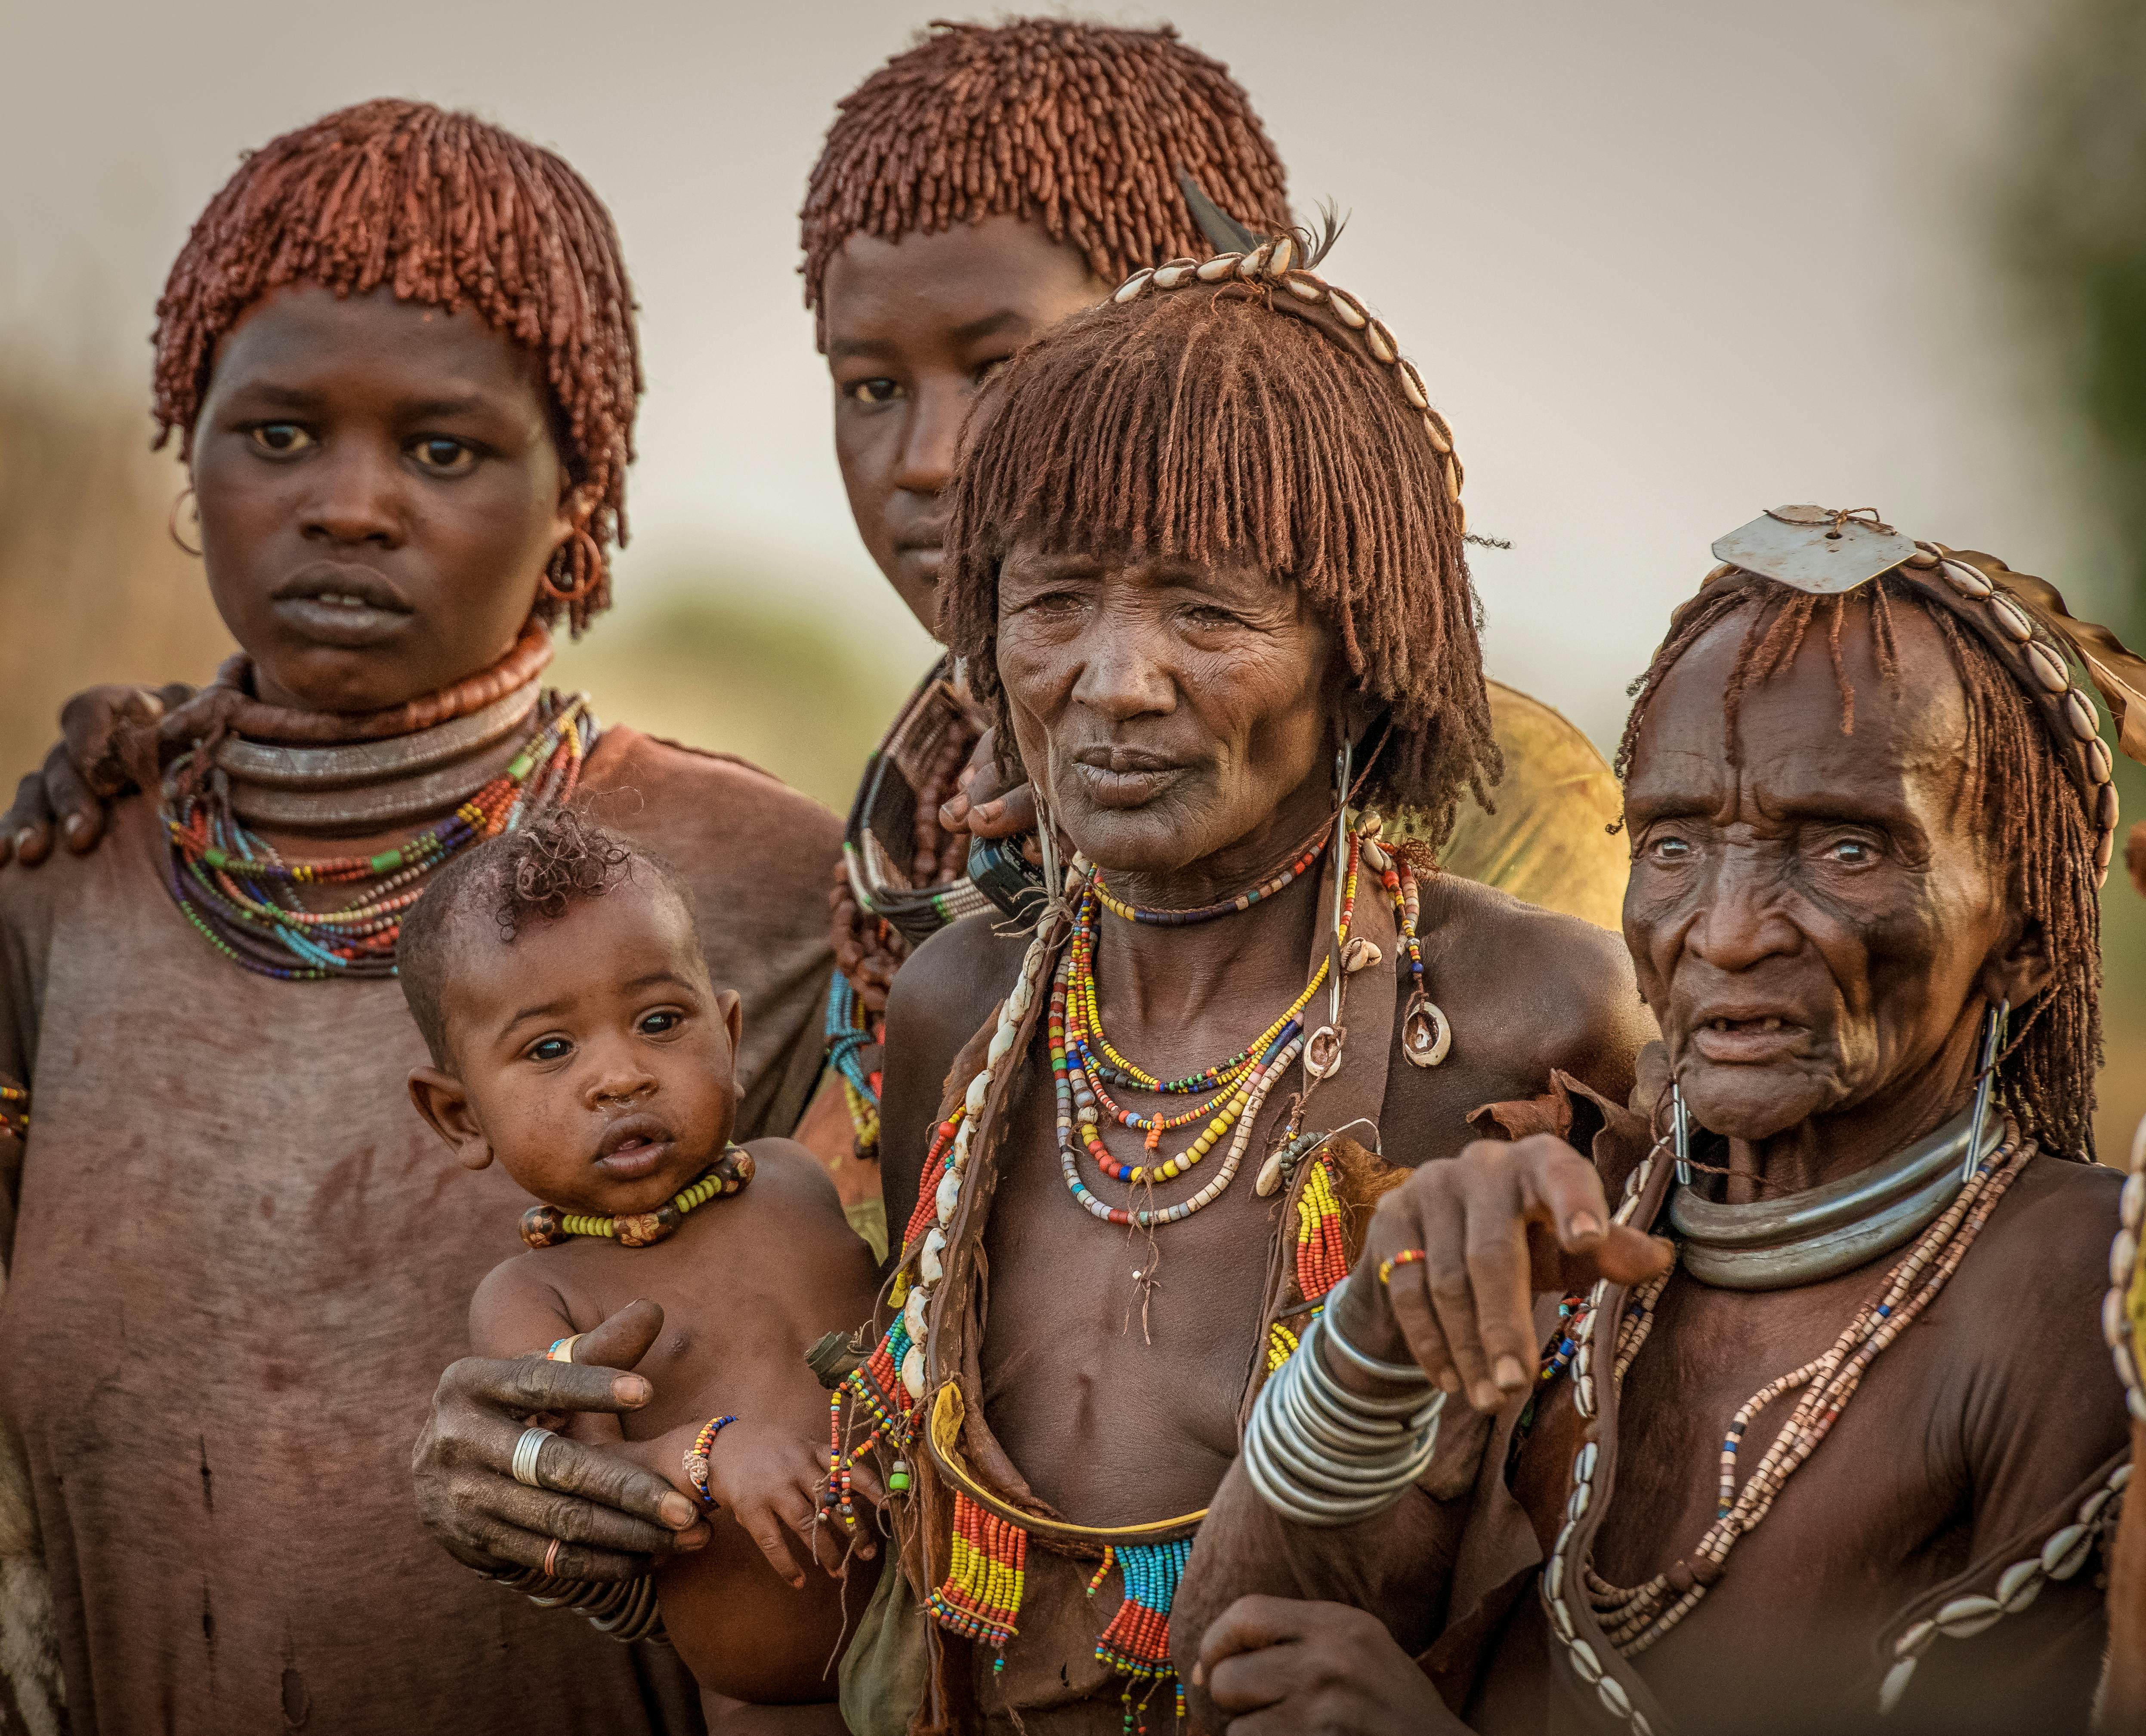 Tribal African Teen Tribe